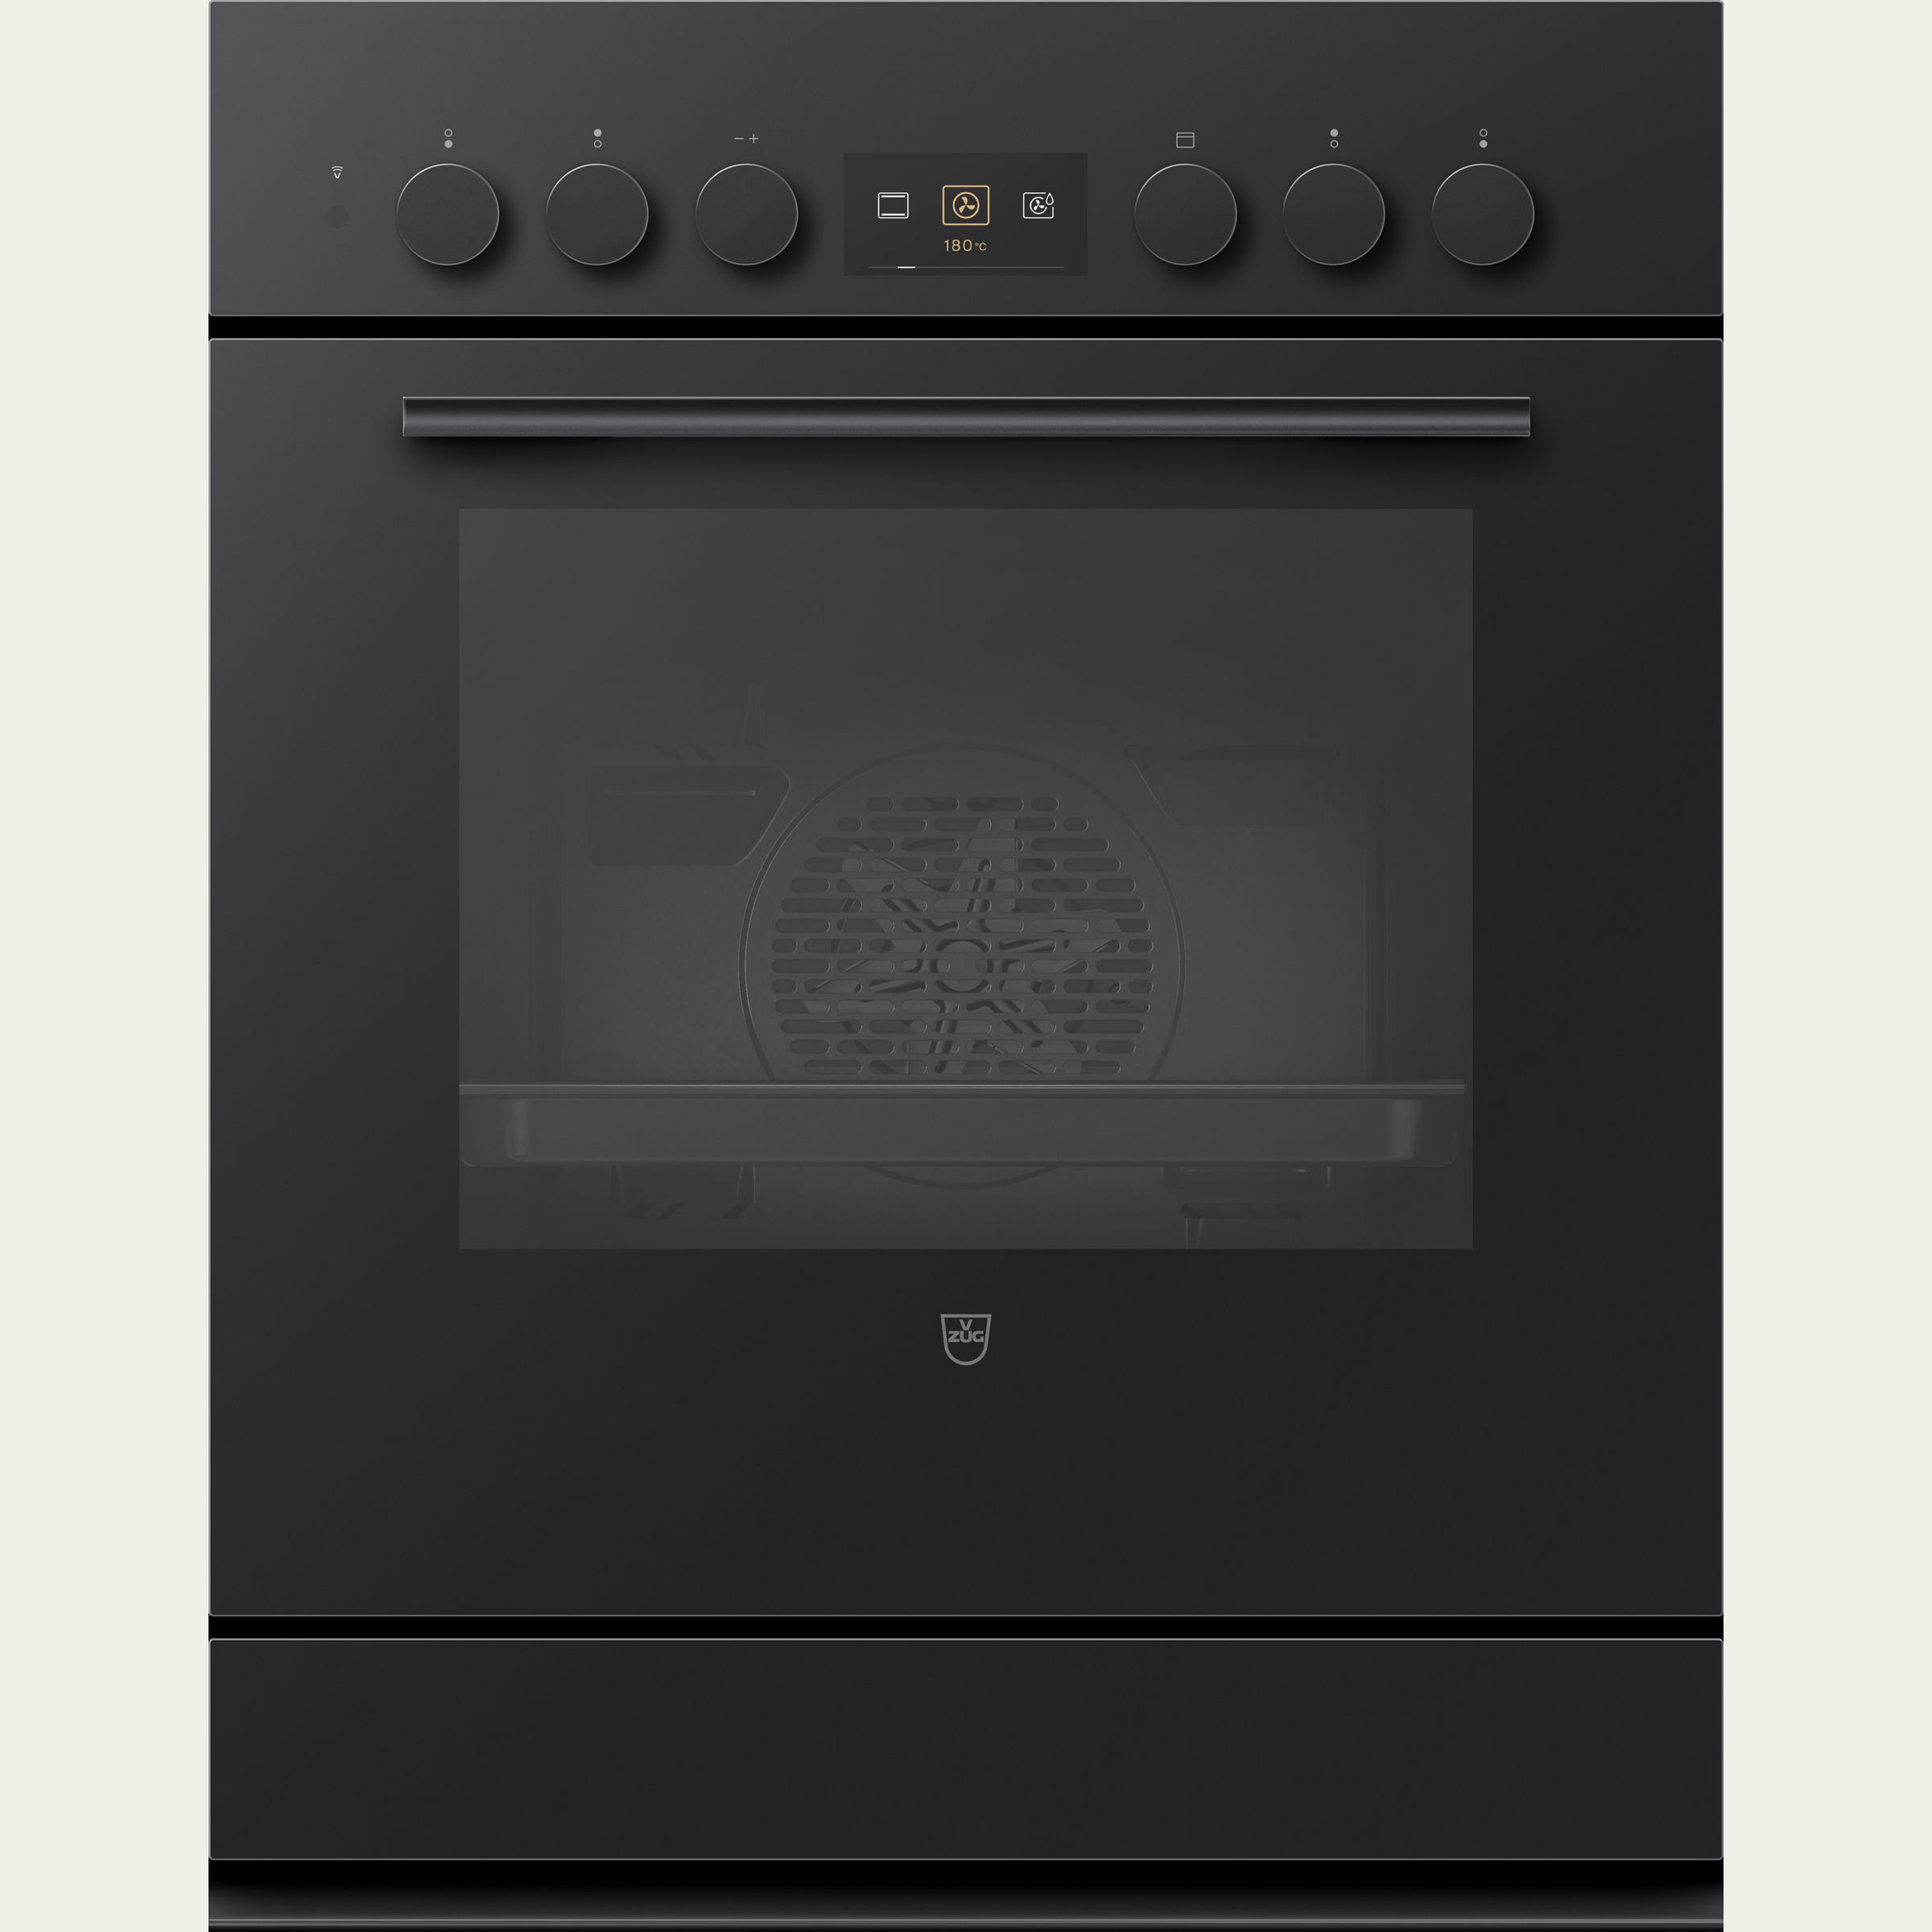 V-ZUG Cooker Combair V600 7UH, Standard width: 60 cm, Standard height: 76.2 cm, Nero with glass, Handle: Nero, dial, V-ZUG-Home, Heatable appliance drawer, Number of controllable cooking zones: 4, 400V